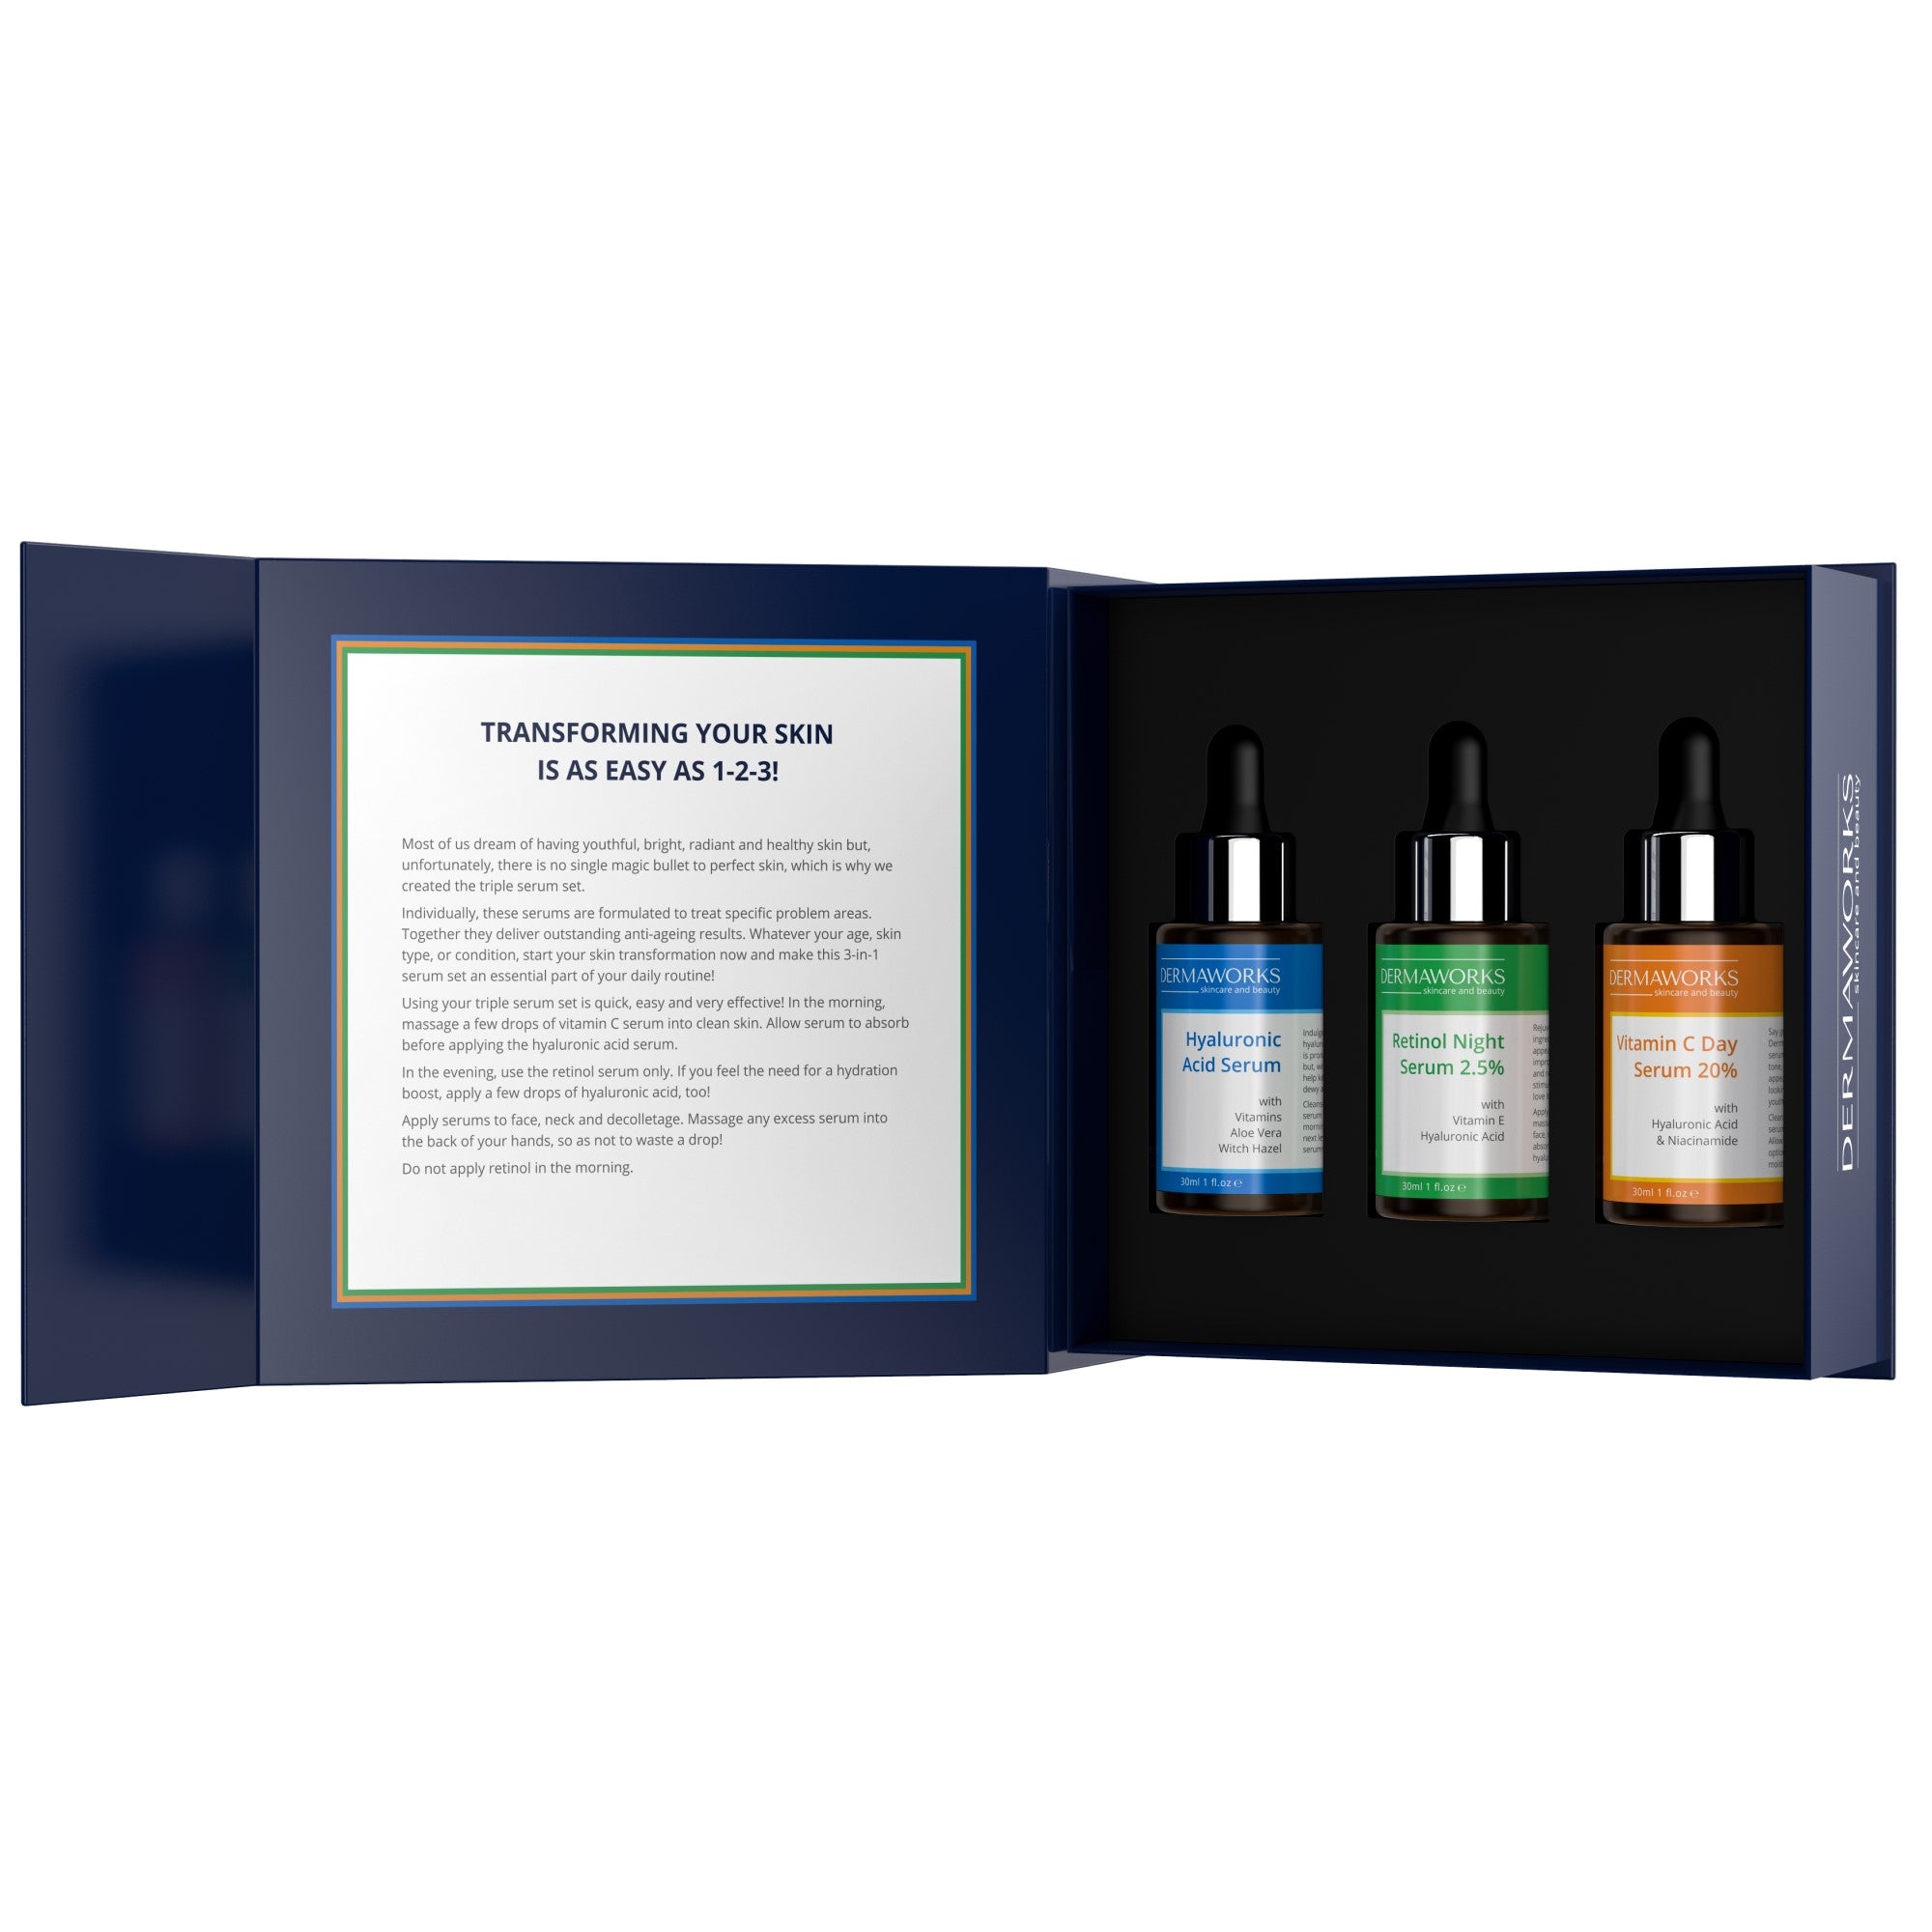 Box set of Dermaworks skincare face serums; Retinol with vitamin E, Vitamin C with Niacinamide and hyaluronic acid serum with vitamins, aloe vera and witch hazel.